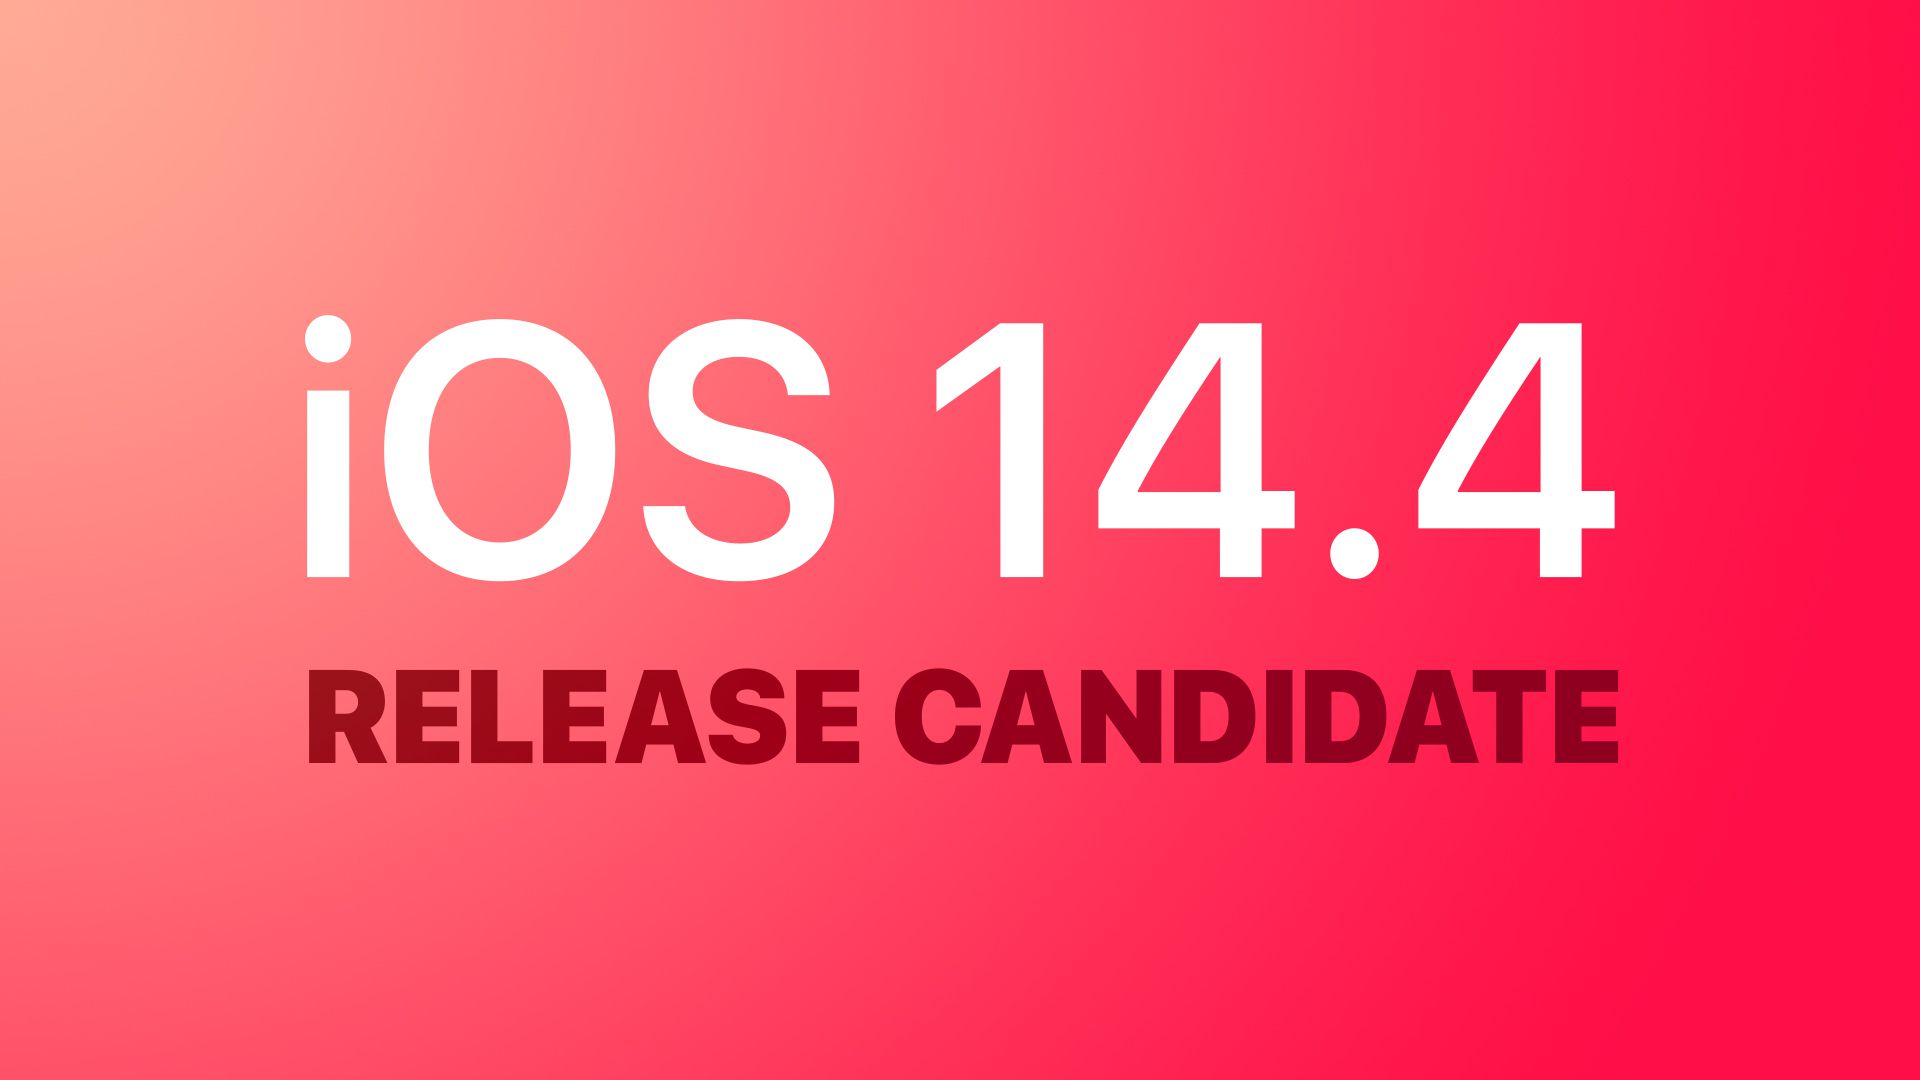 Apple Seeds iOS 14.4 and iPadOS 14.4 Release Candidate for developers and public beta testers